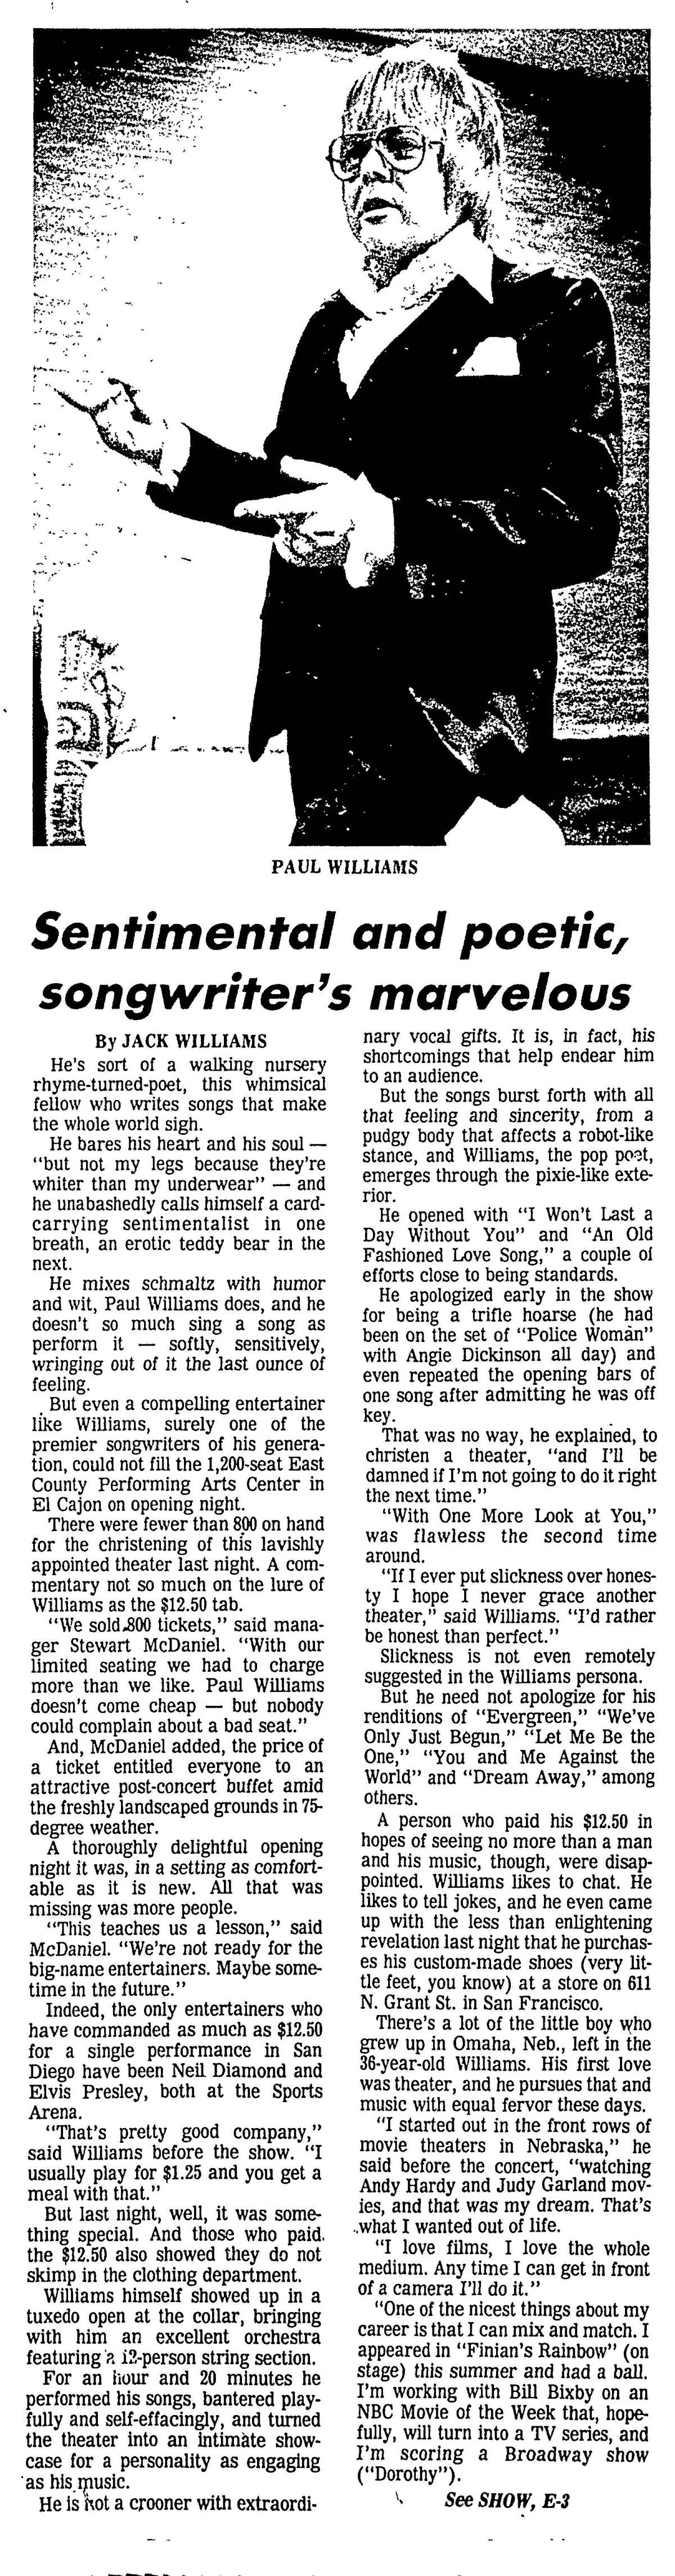 Jack Williams review of singer-songwriter Paul Williams, published in the Evening Tribune, Friday, Sept. 9, 1977.